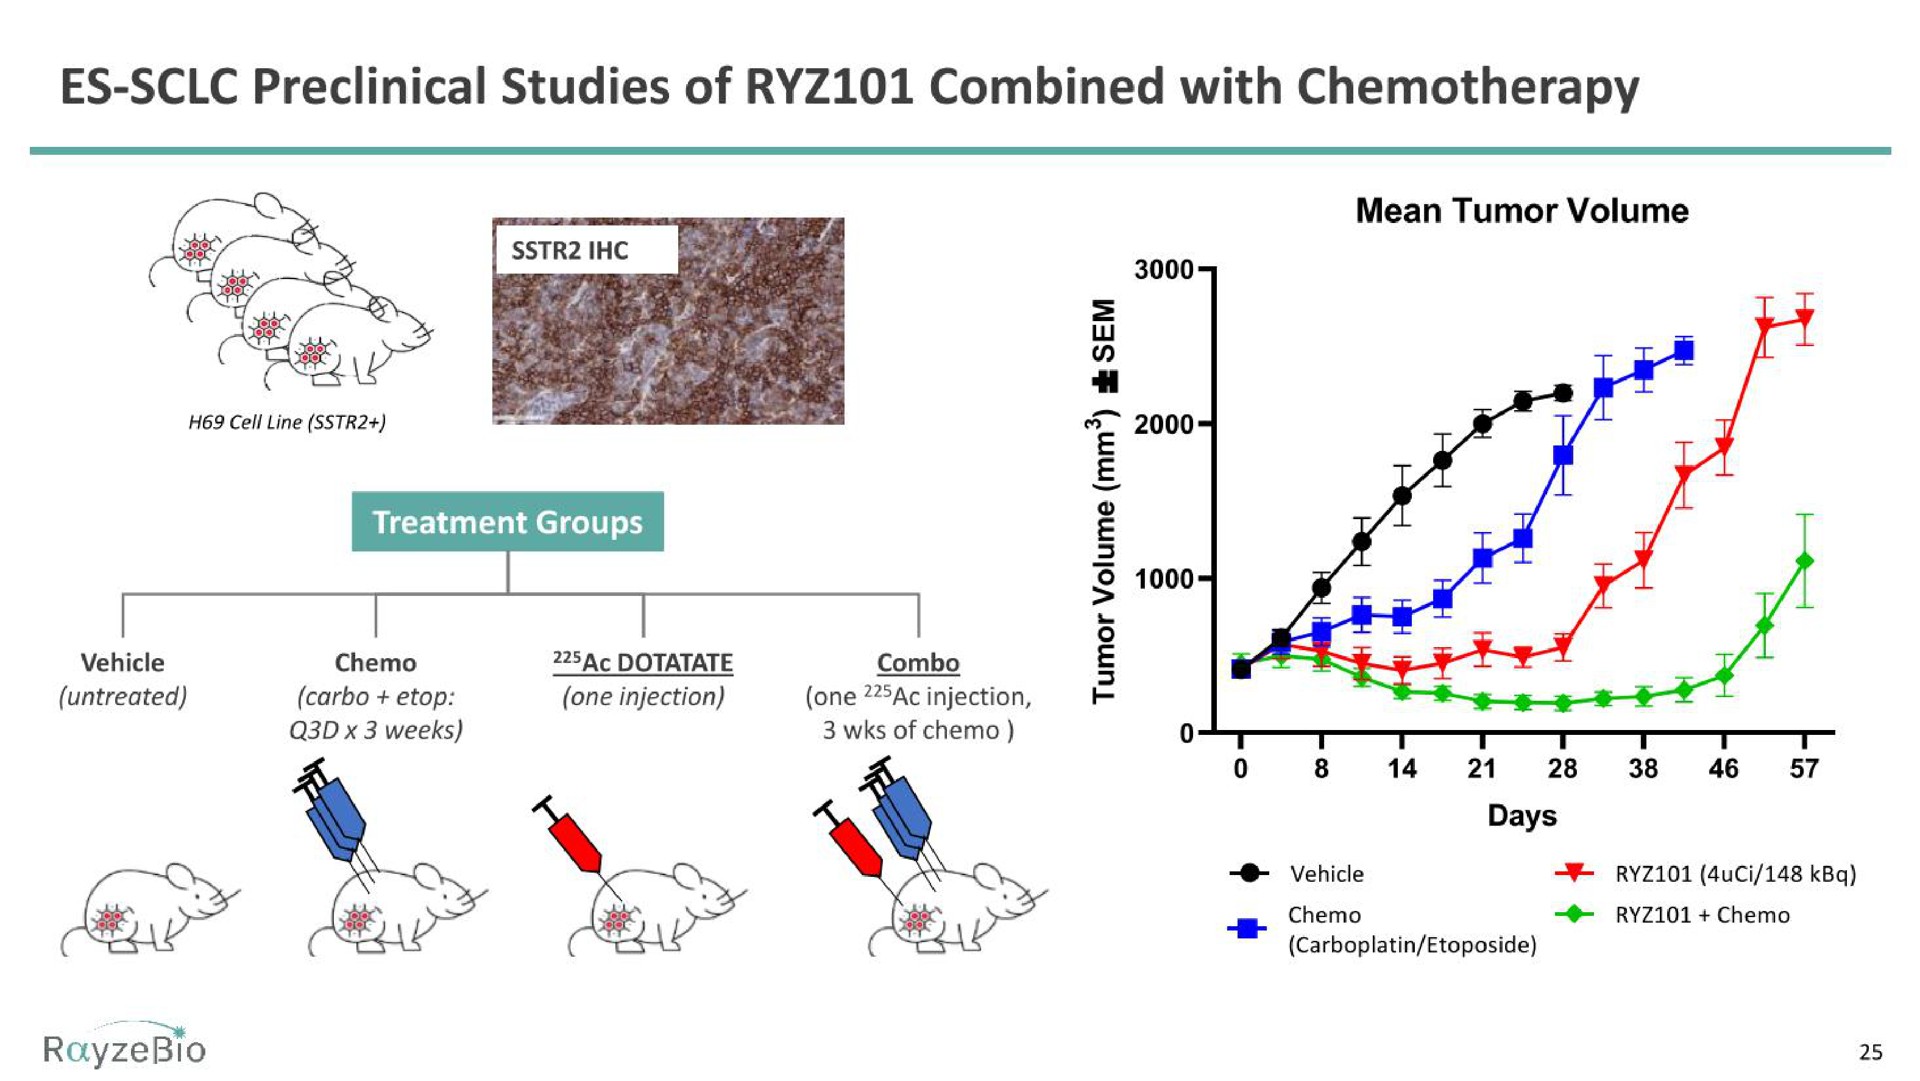 preclinical studies of combined with chemotherapy | RayzeBio